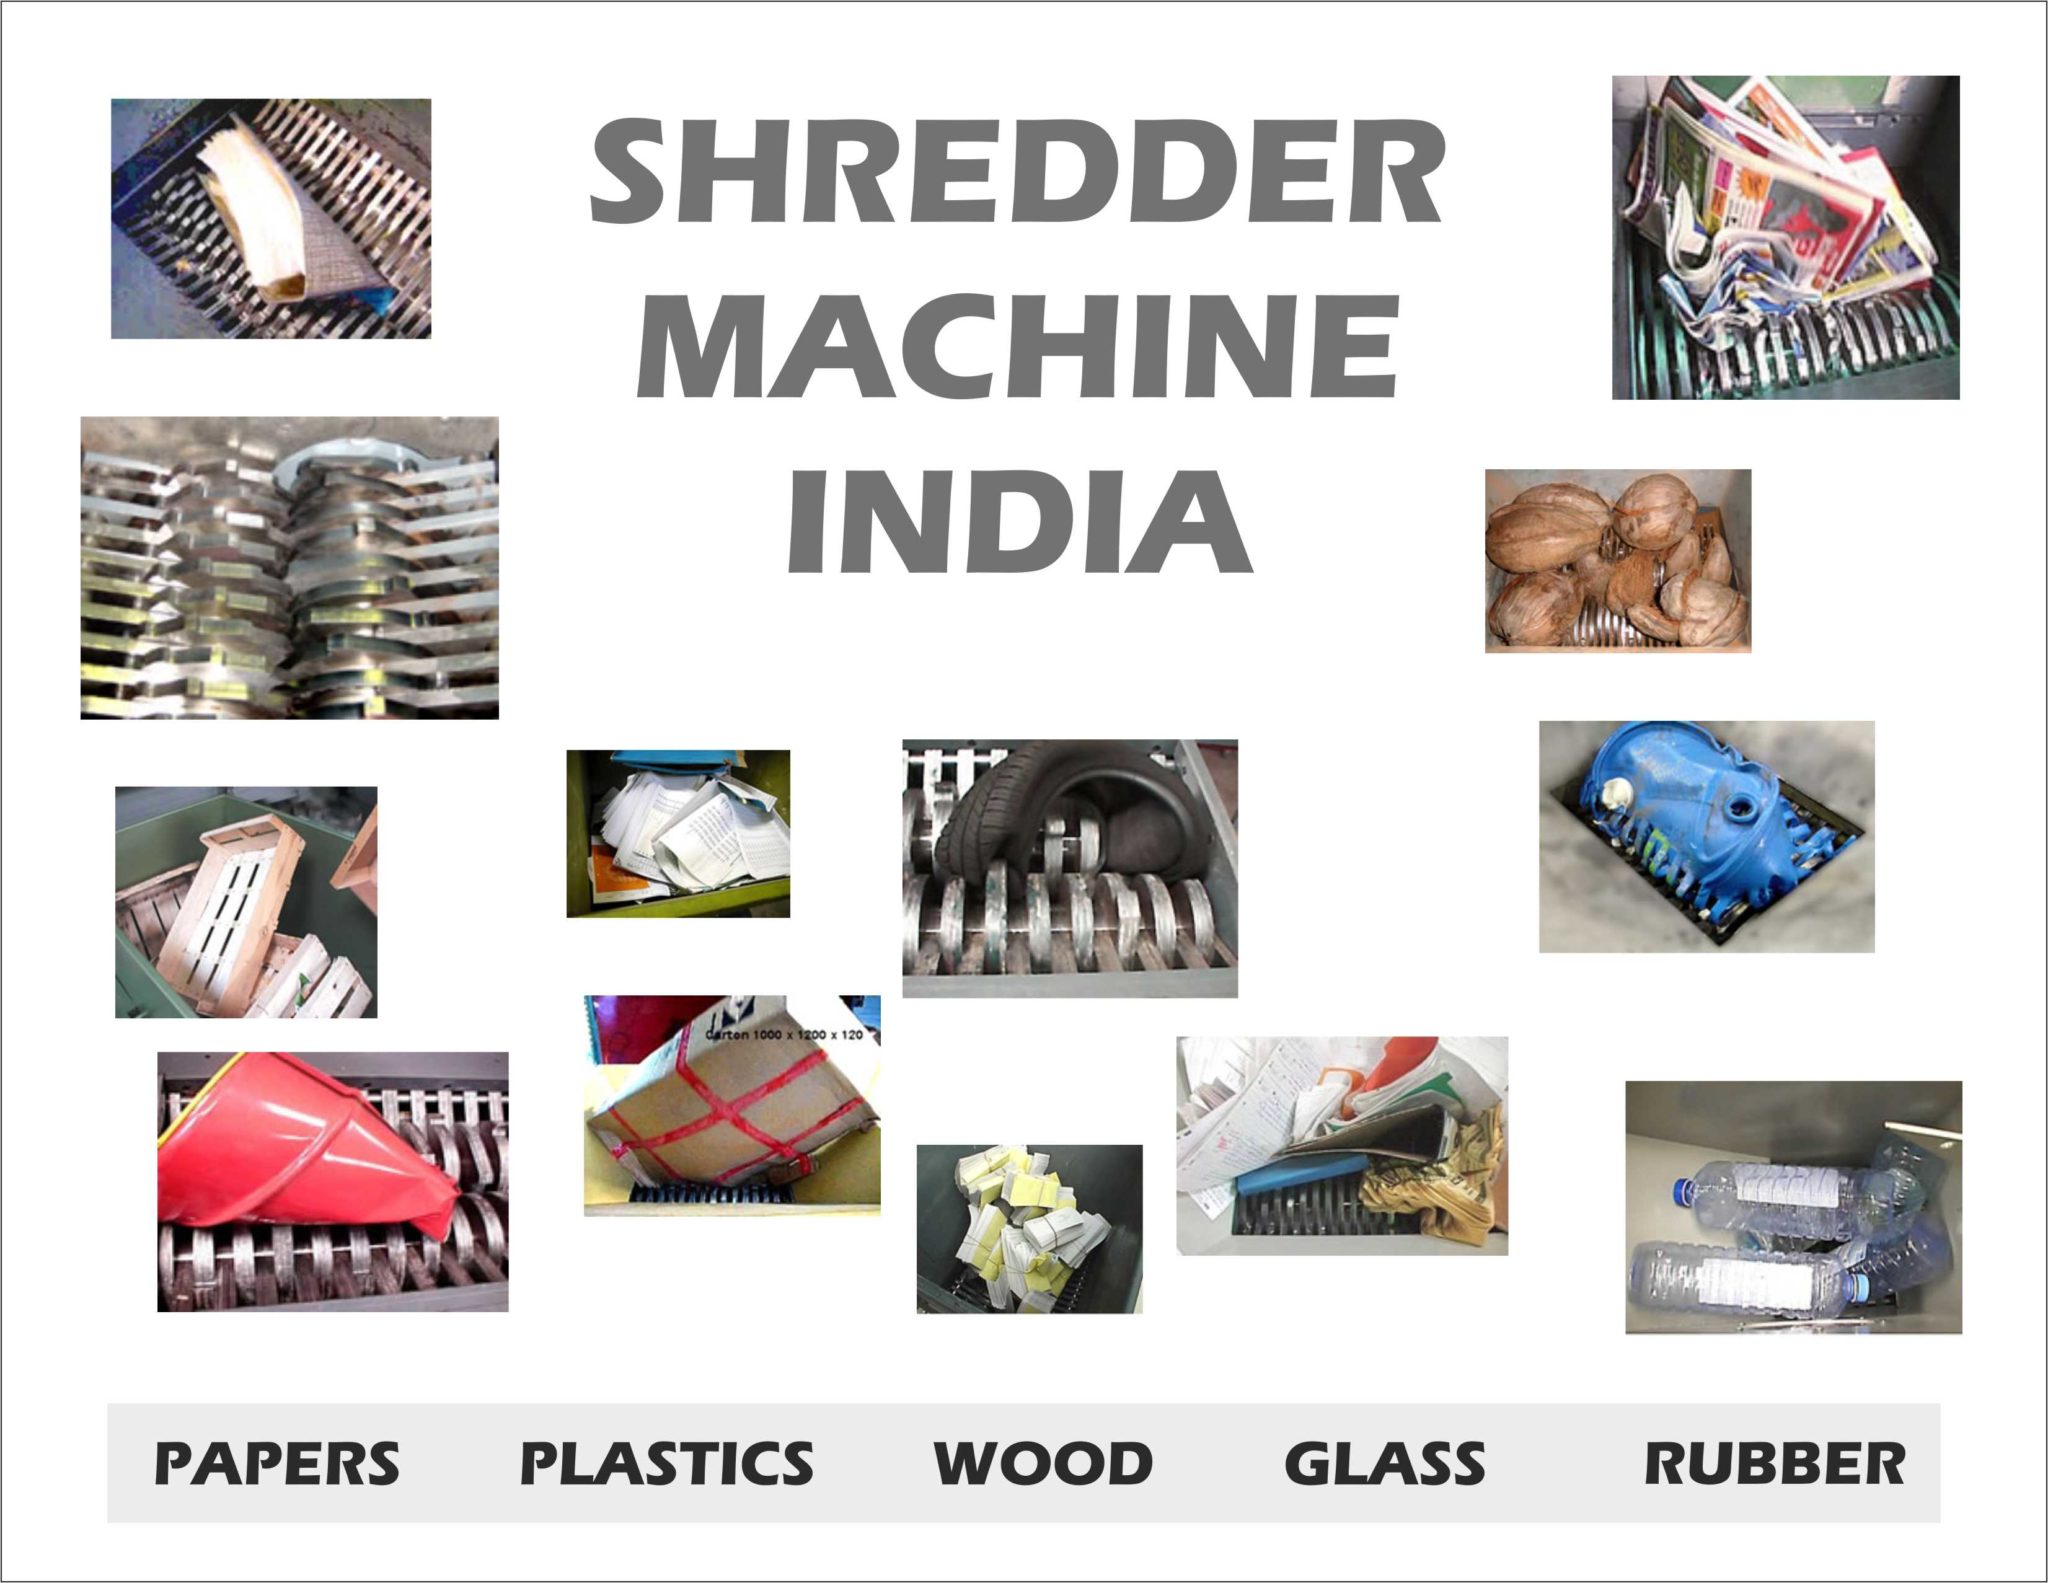 Shredding Machines: Types, Applications, Advantages, and Standards